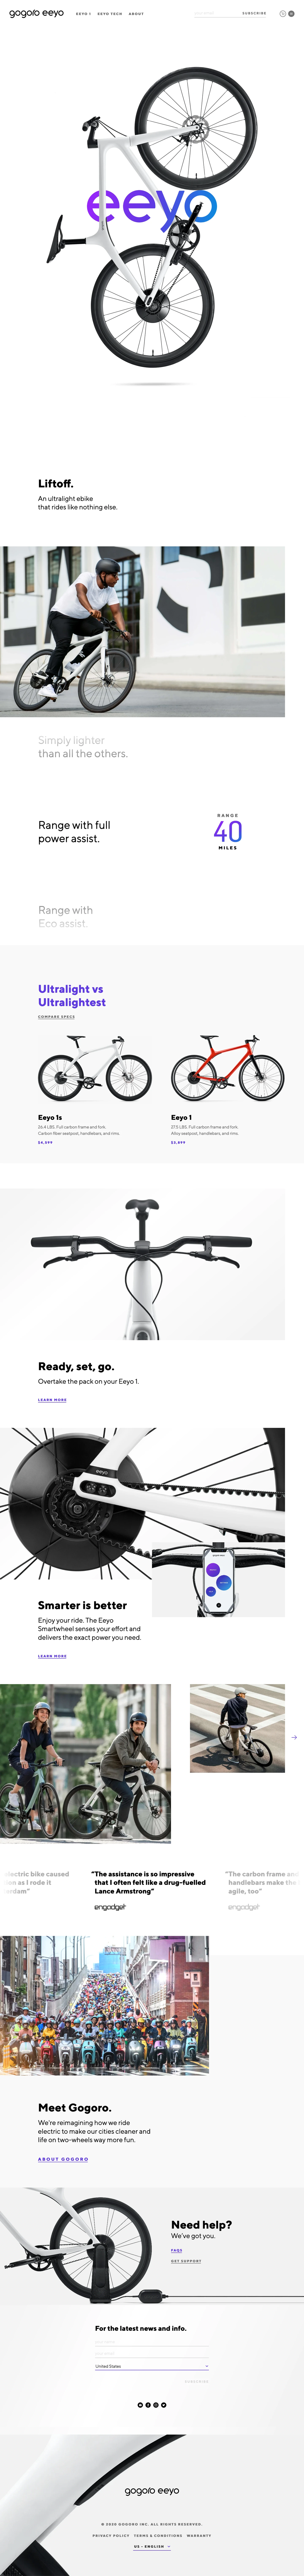 Gogoro Eeyo Landing Page Example: An ultralight ebike that rides like nothing else. Whether navigating a speedy work commute, or just cruising around town, the Gogoro Eeyo is city riding at its best.